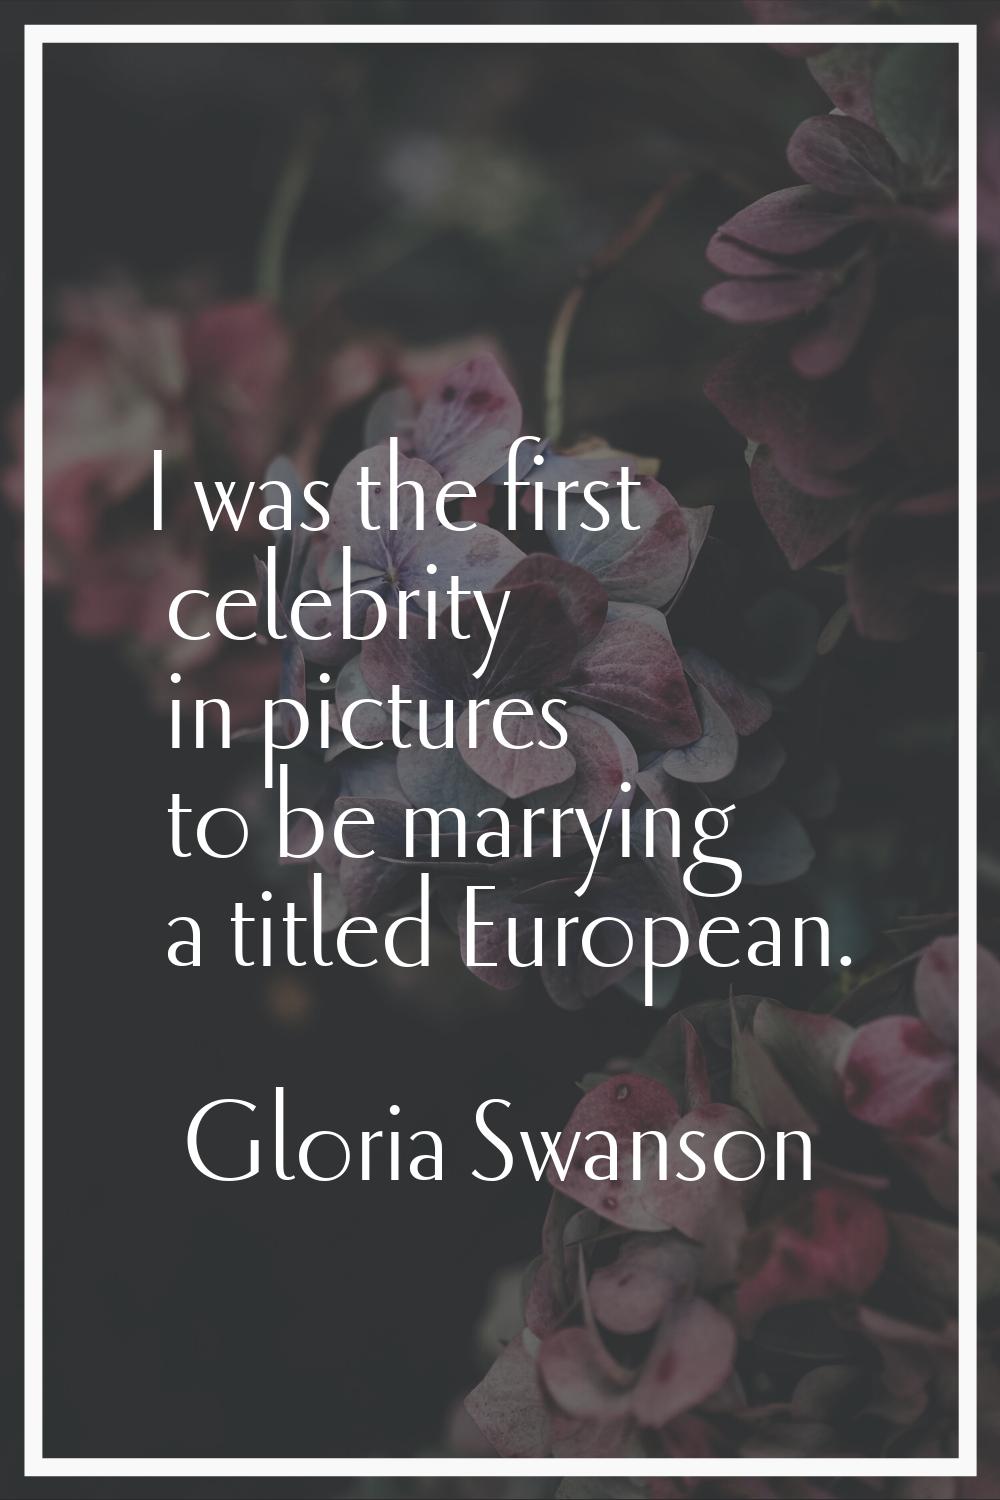 I was the first celebrity in pictures to be marrying a titled European.